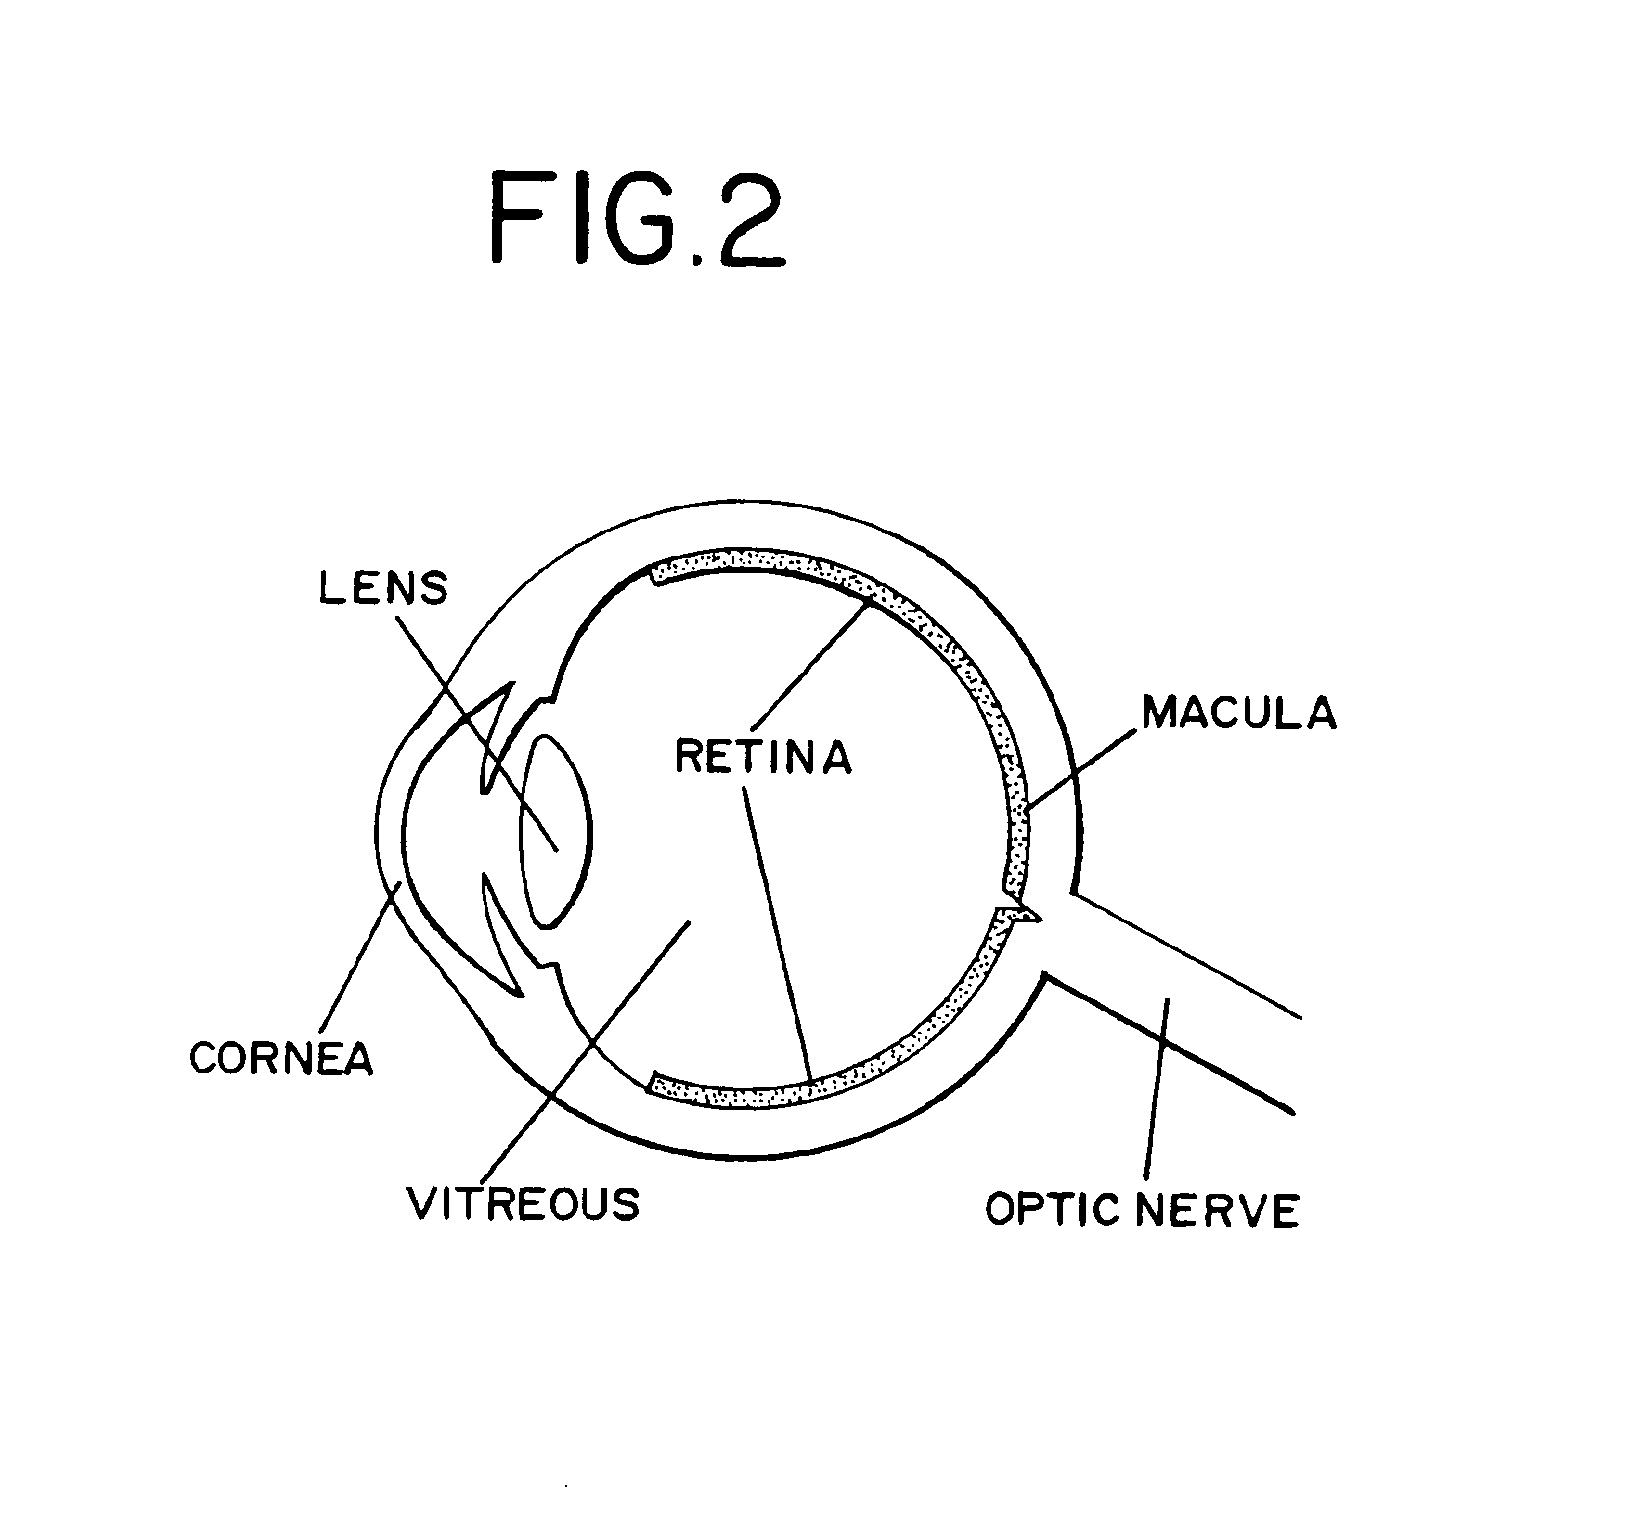 Method of radiation delivery to the eye